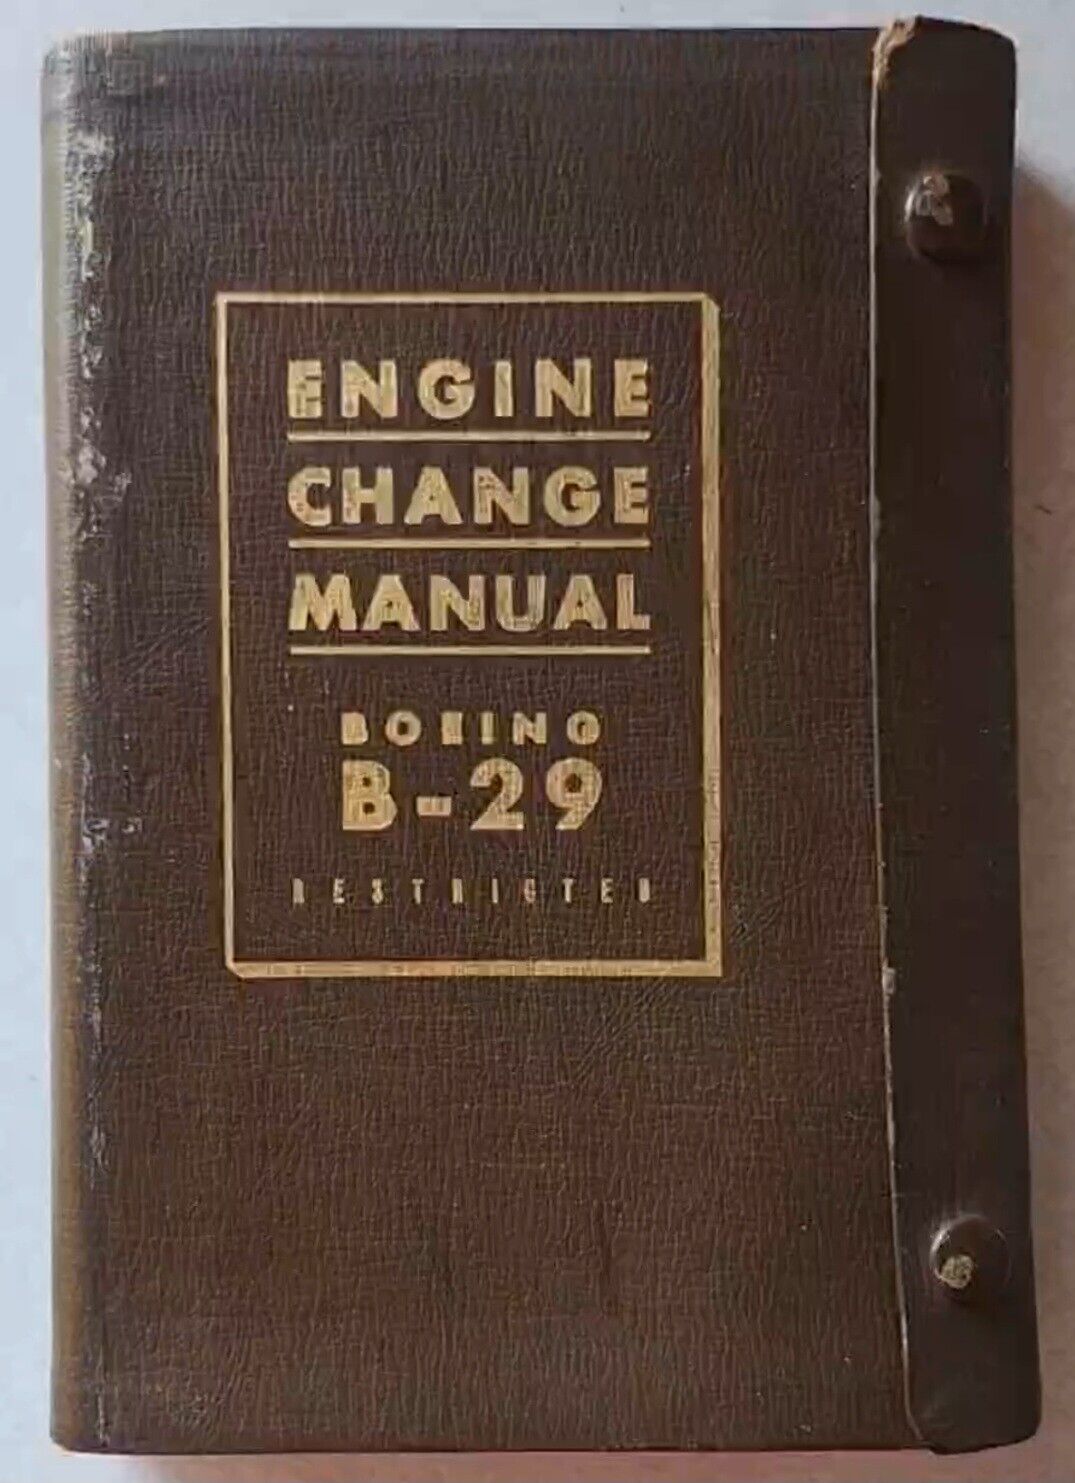 1ST EDITION 1944 WW2 BOEING B-29 SUPERFORTRESS - ENGINE CHANGE MANUAL